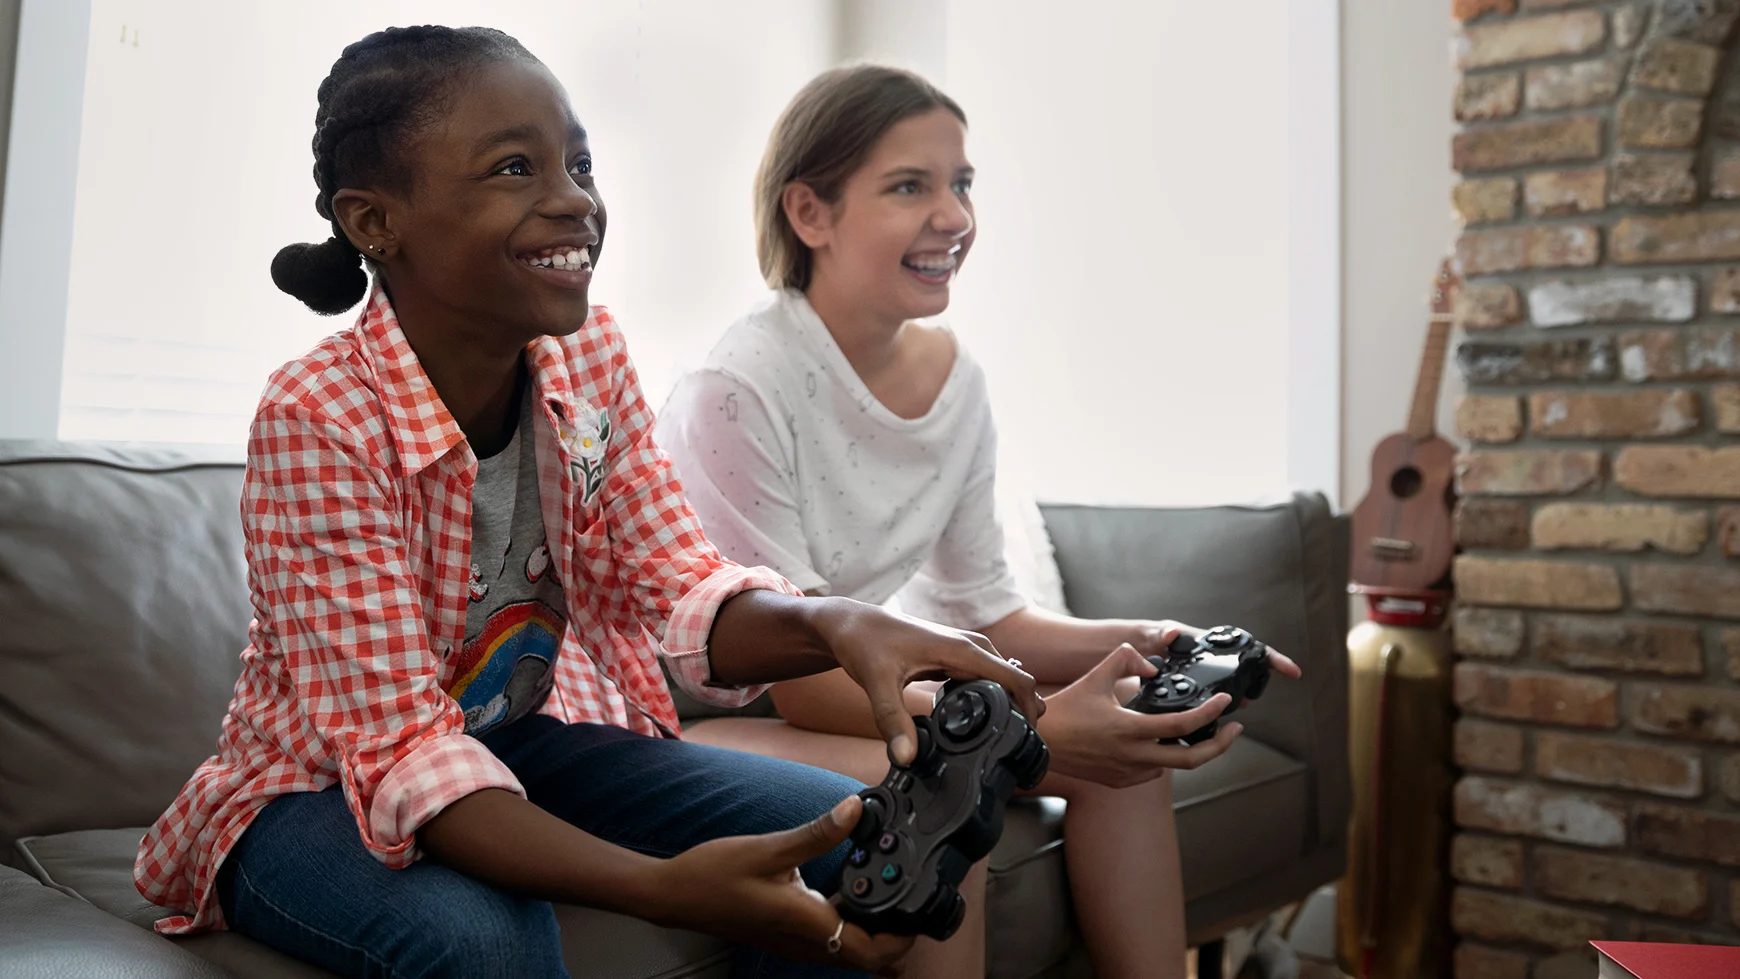 Two smiling children sit together on a sofa, playing a video game and holding controllers while watching the screen.